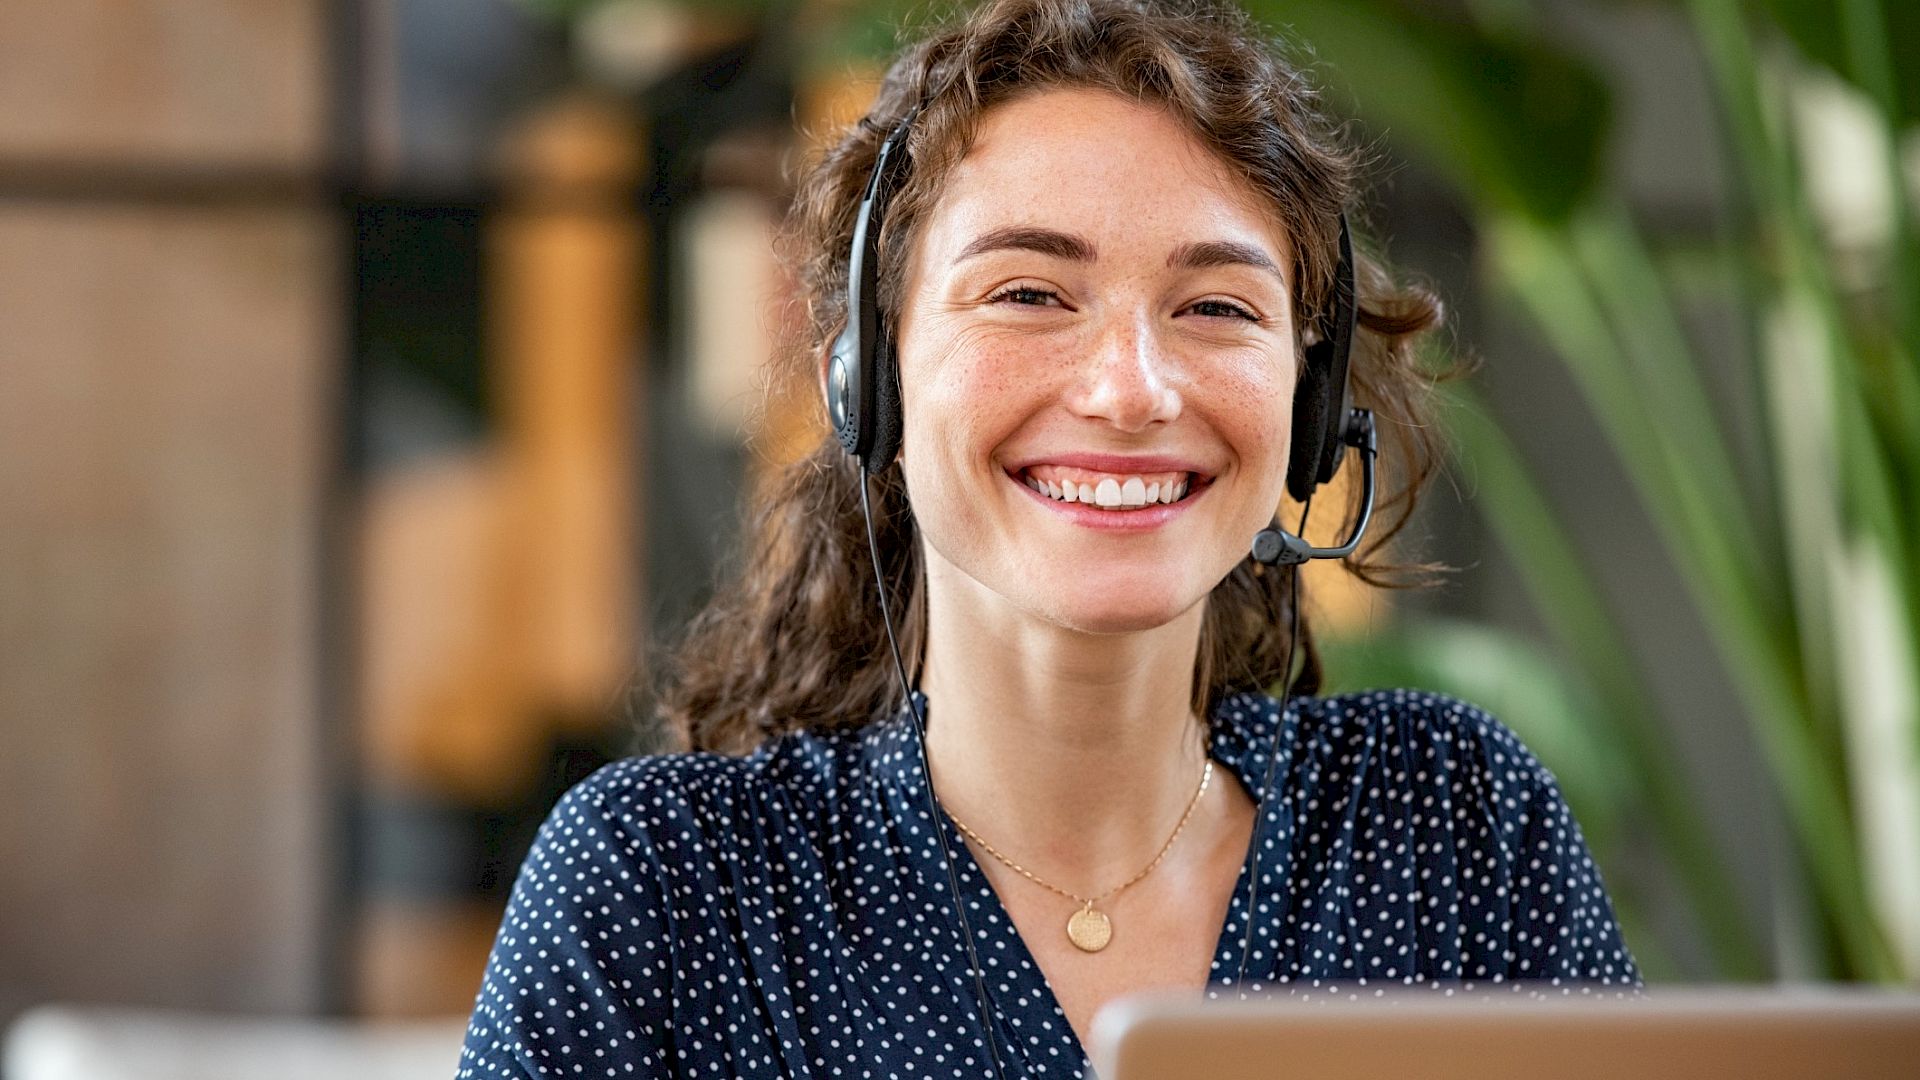 Young customer services representative, wearing a headset and smiling